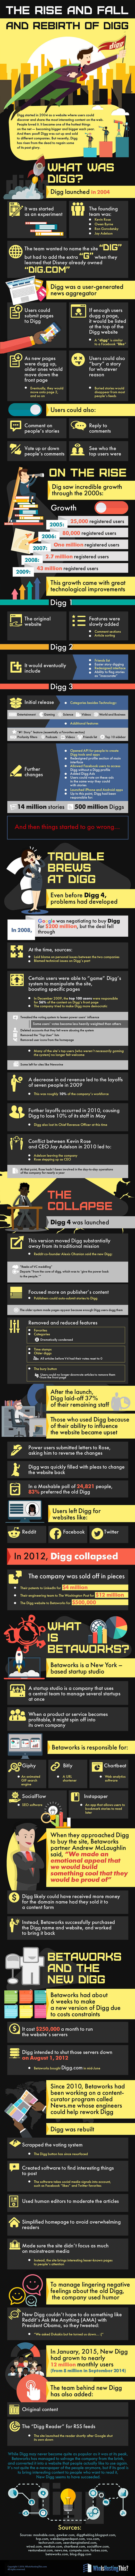 The Rise, Fall and Rebirth of Digg Infographic